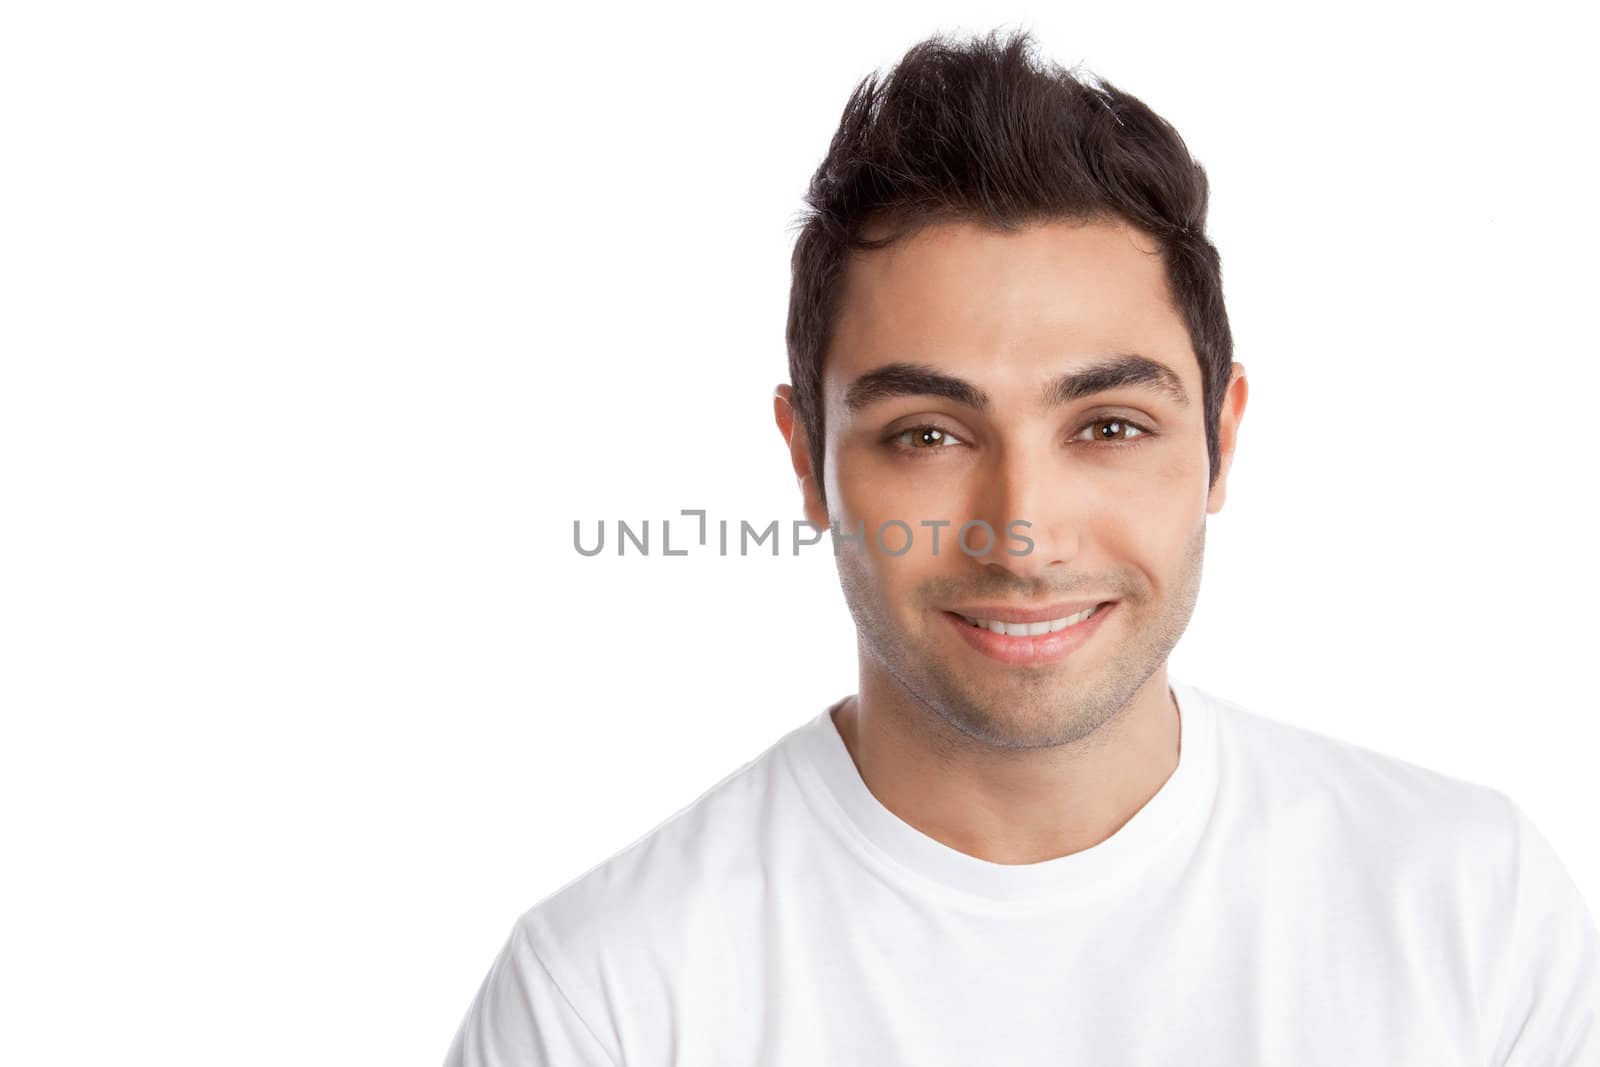 Portrait of happy young man isolated on white background.